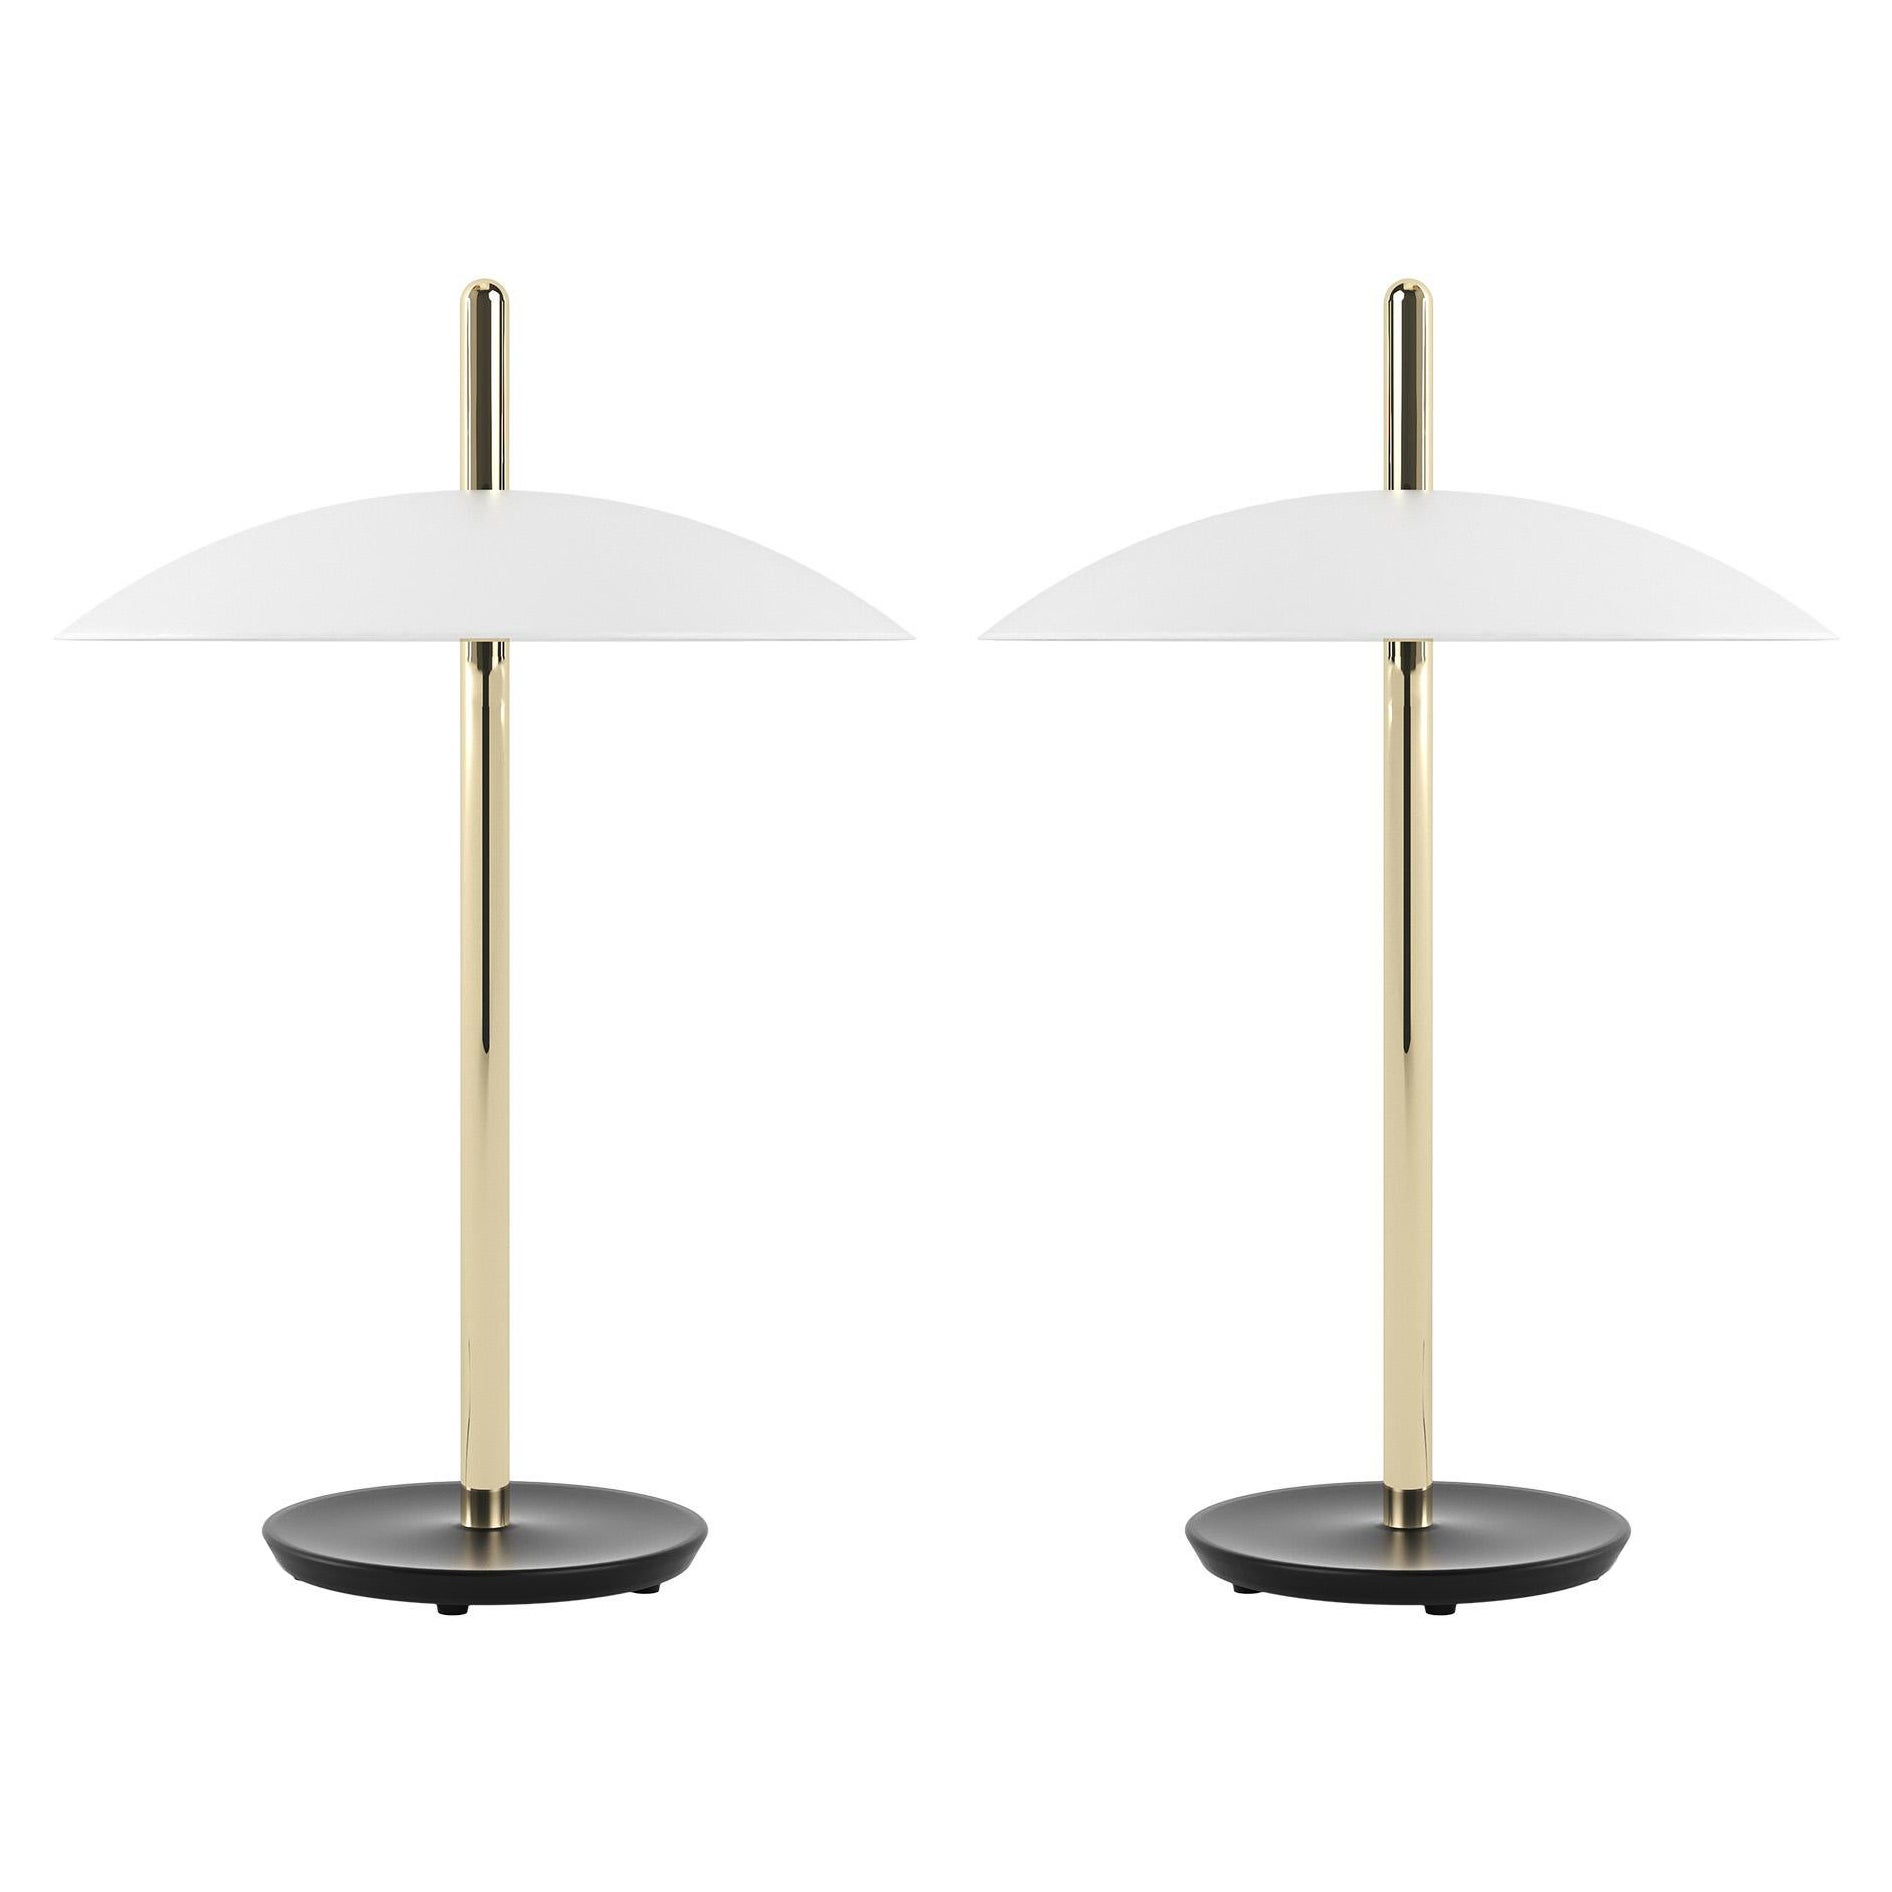 Pair of Signal Table Lamps from Souda, White & Brass, Made to Order